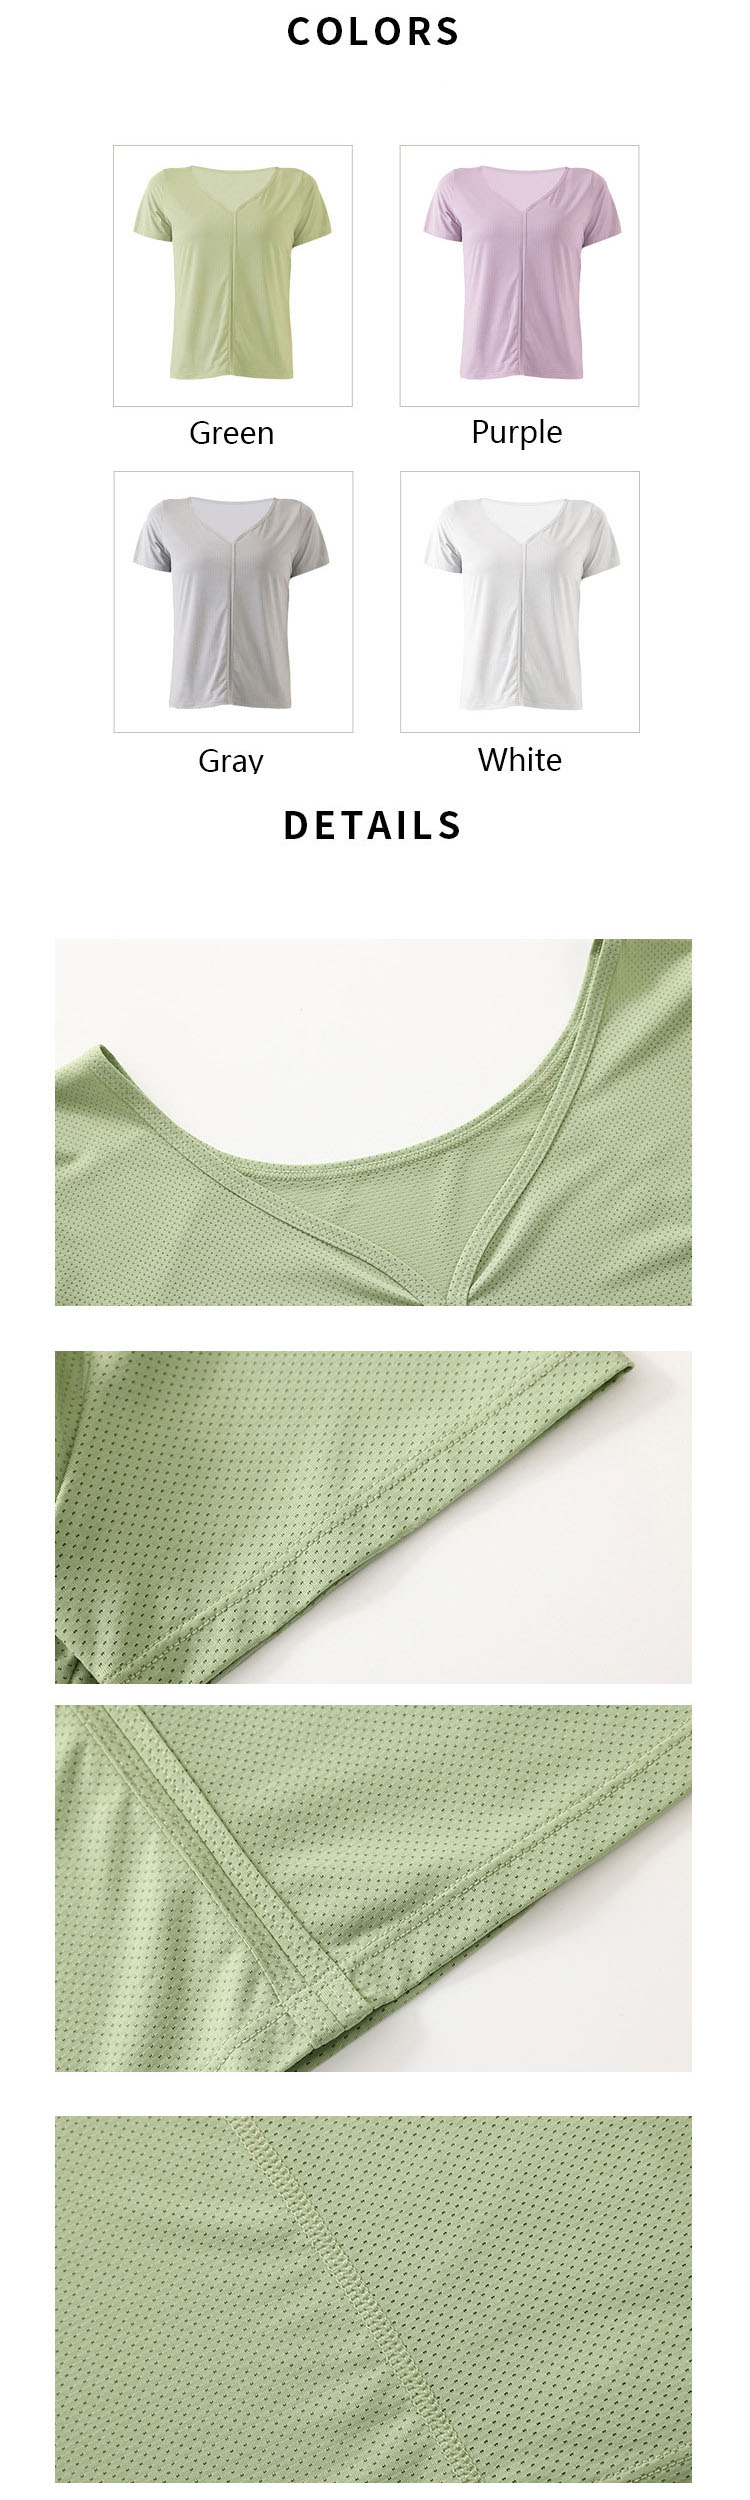 The mesh structure is enduring in the sportswear category and will be presented in a striking light retro style in the spring and summer of 2021.